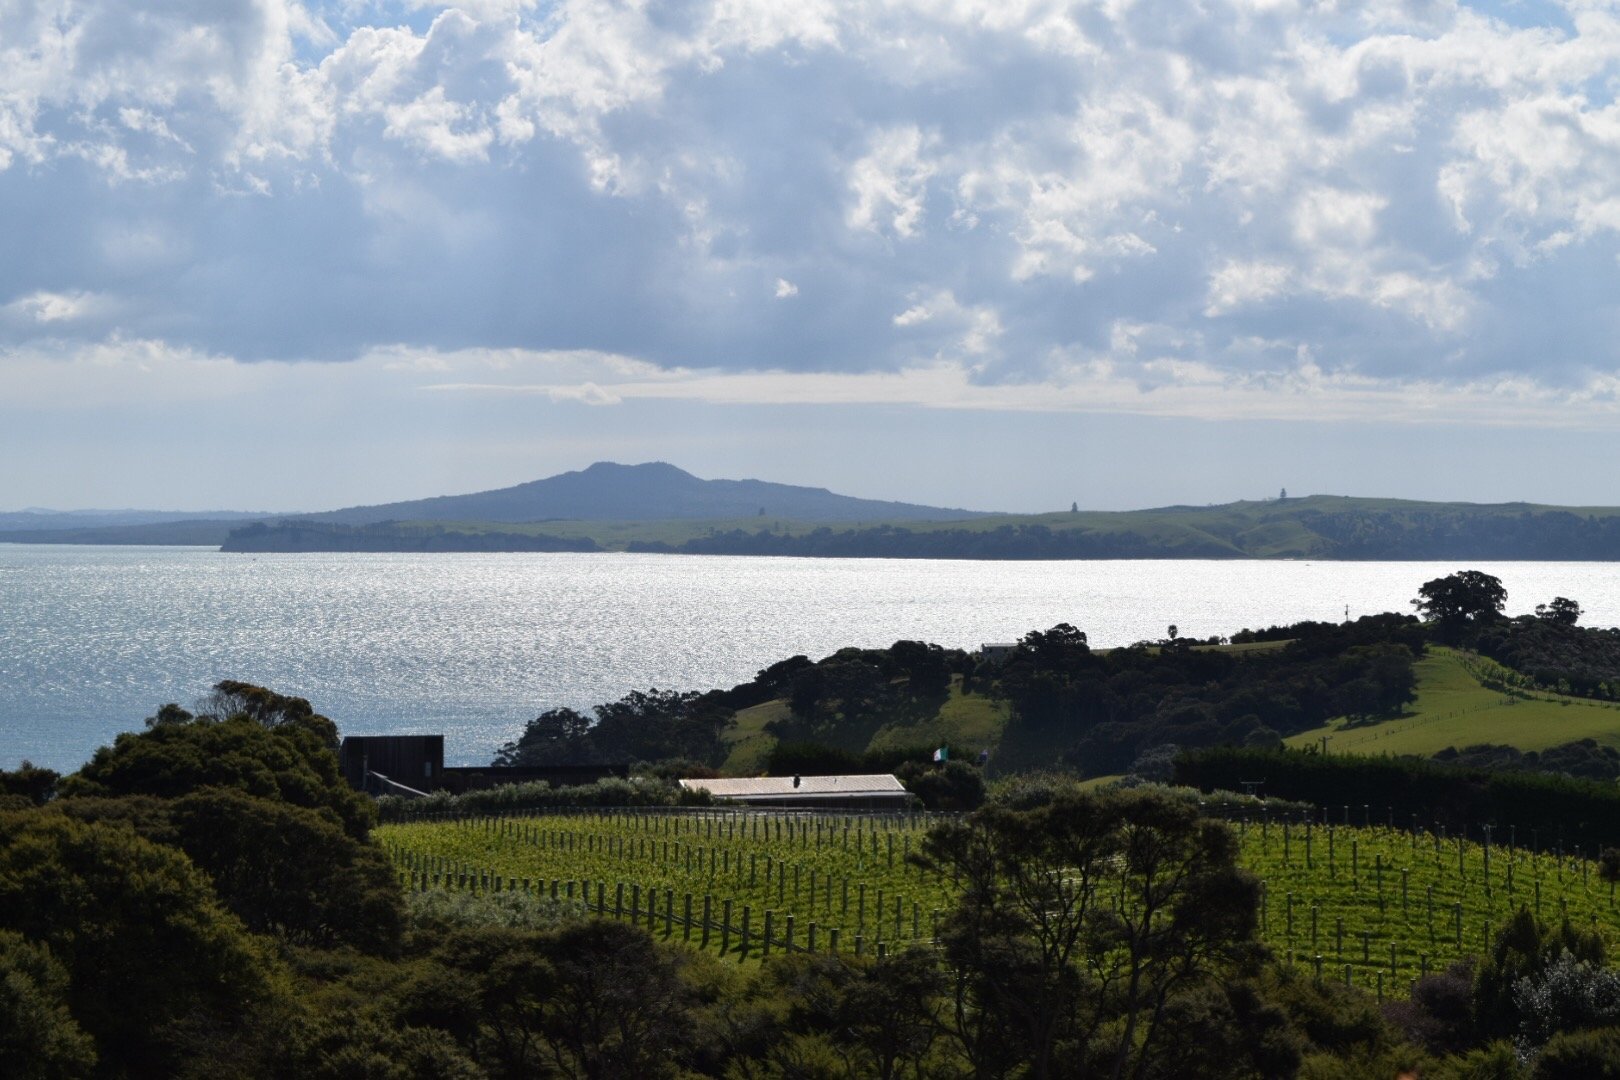 An Afternoon Artisan Tour of Waiheke Island in New Zealand